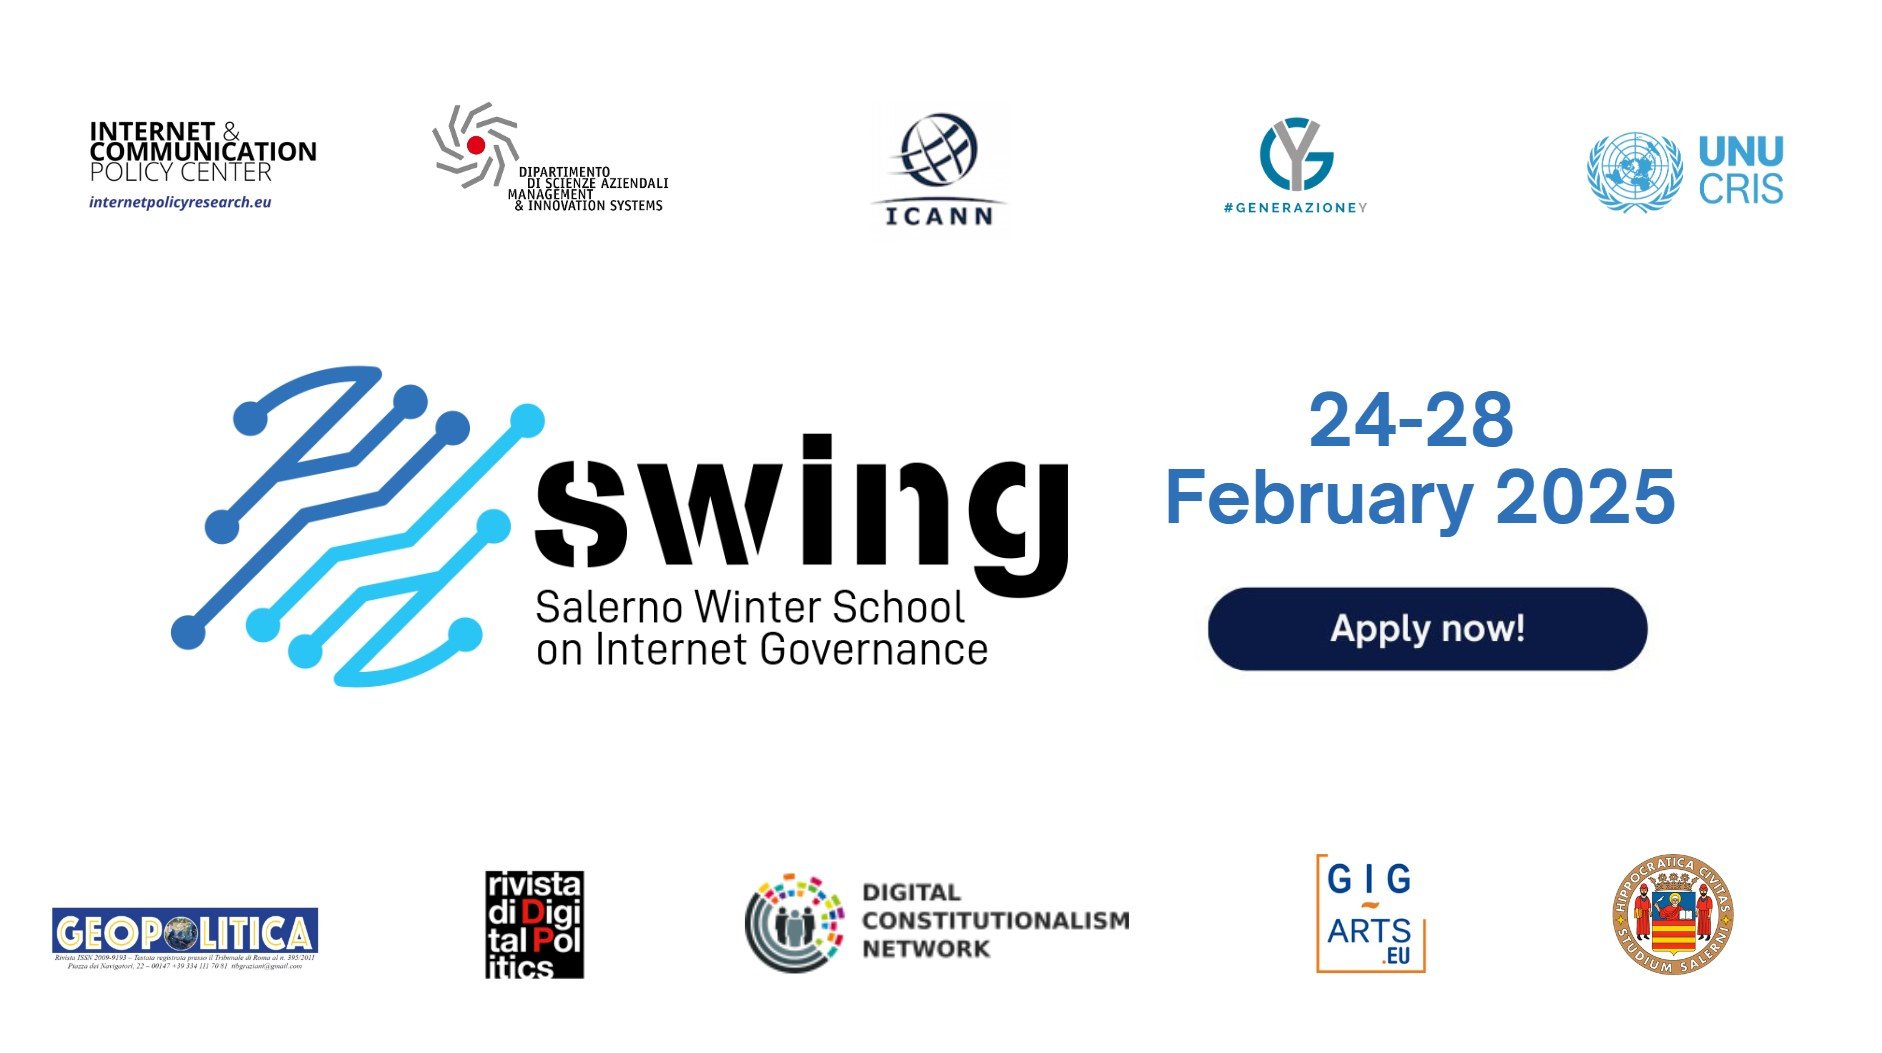 GIG-ARTS announces Partnership with the Salerno Winter School on Internet Governance (SWING)